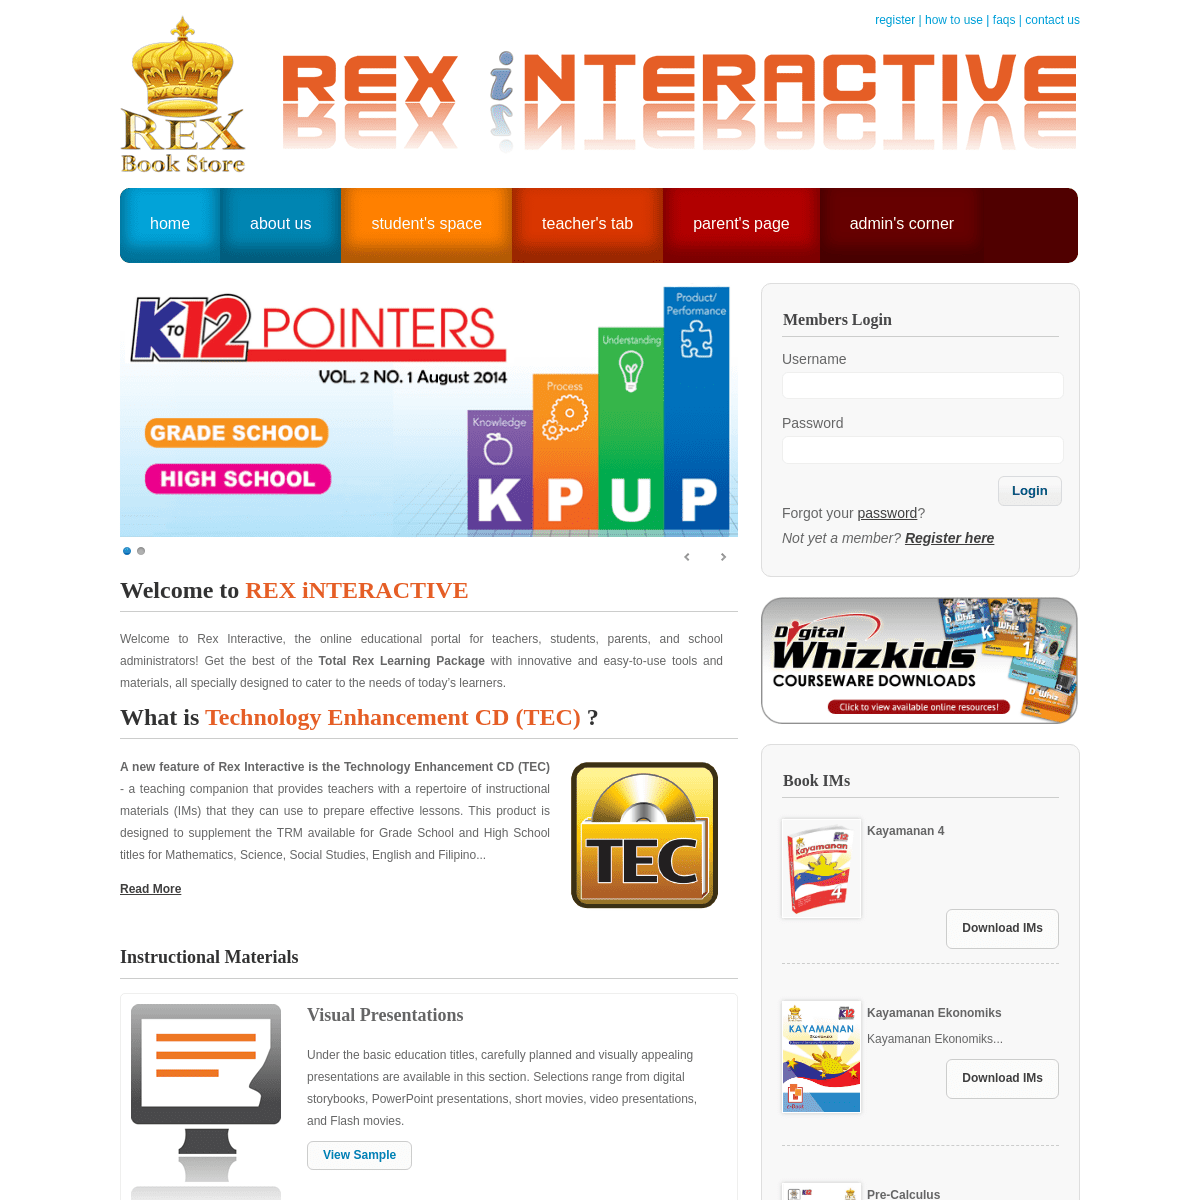 A complete backup of rexinteractive.com